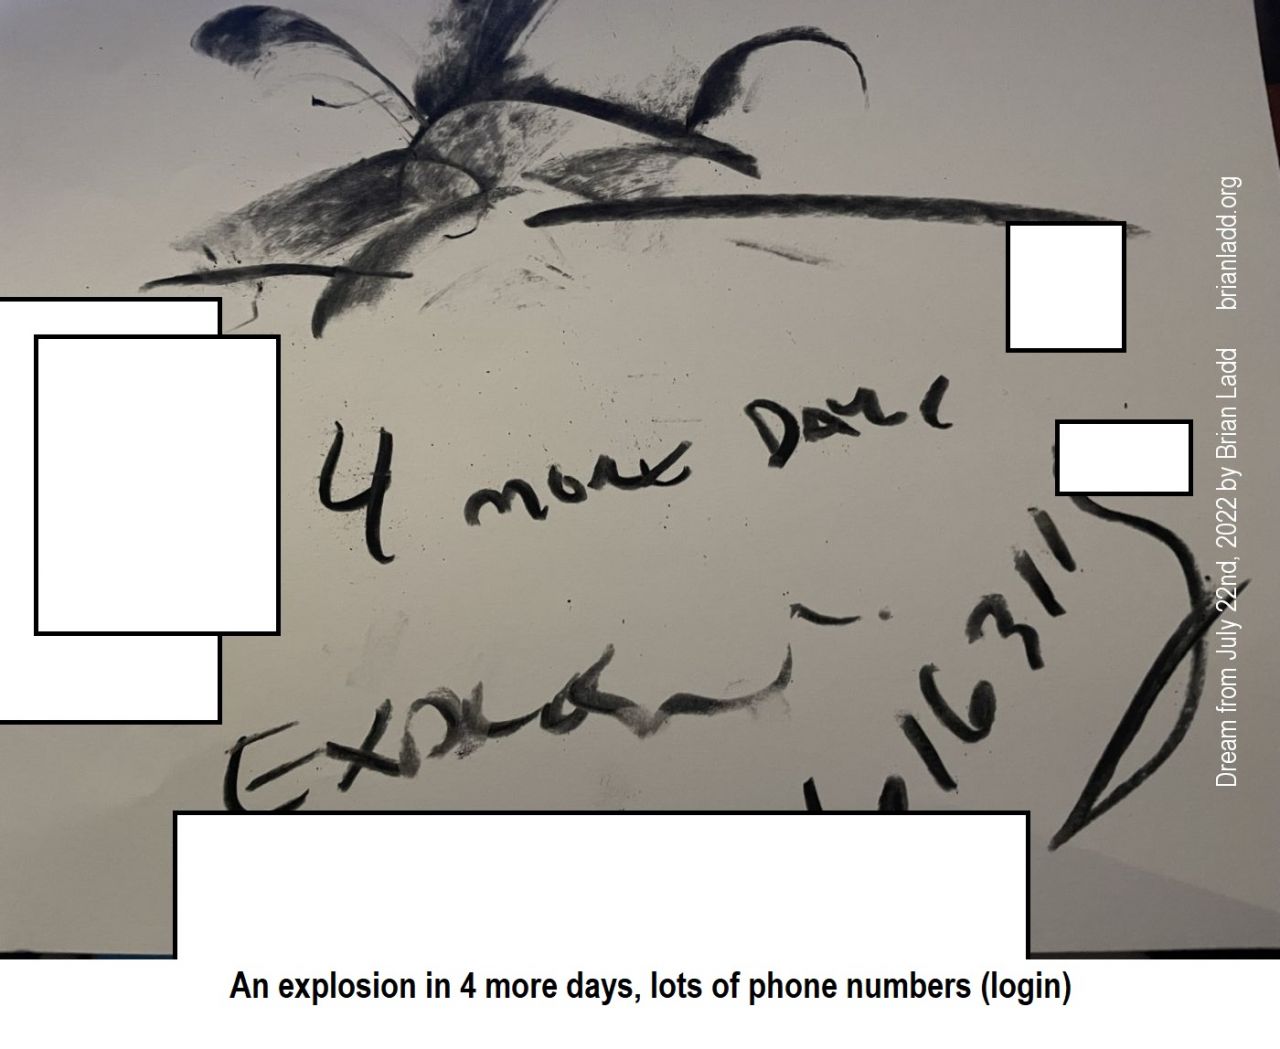 22 July 2022 1   An explosion in 4 more days, lots of phone numbers (login)
An explosion in 4 more days, lots of phone numbers (login)
